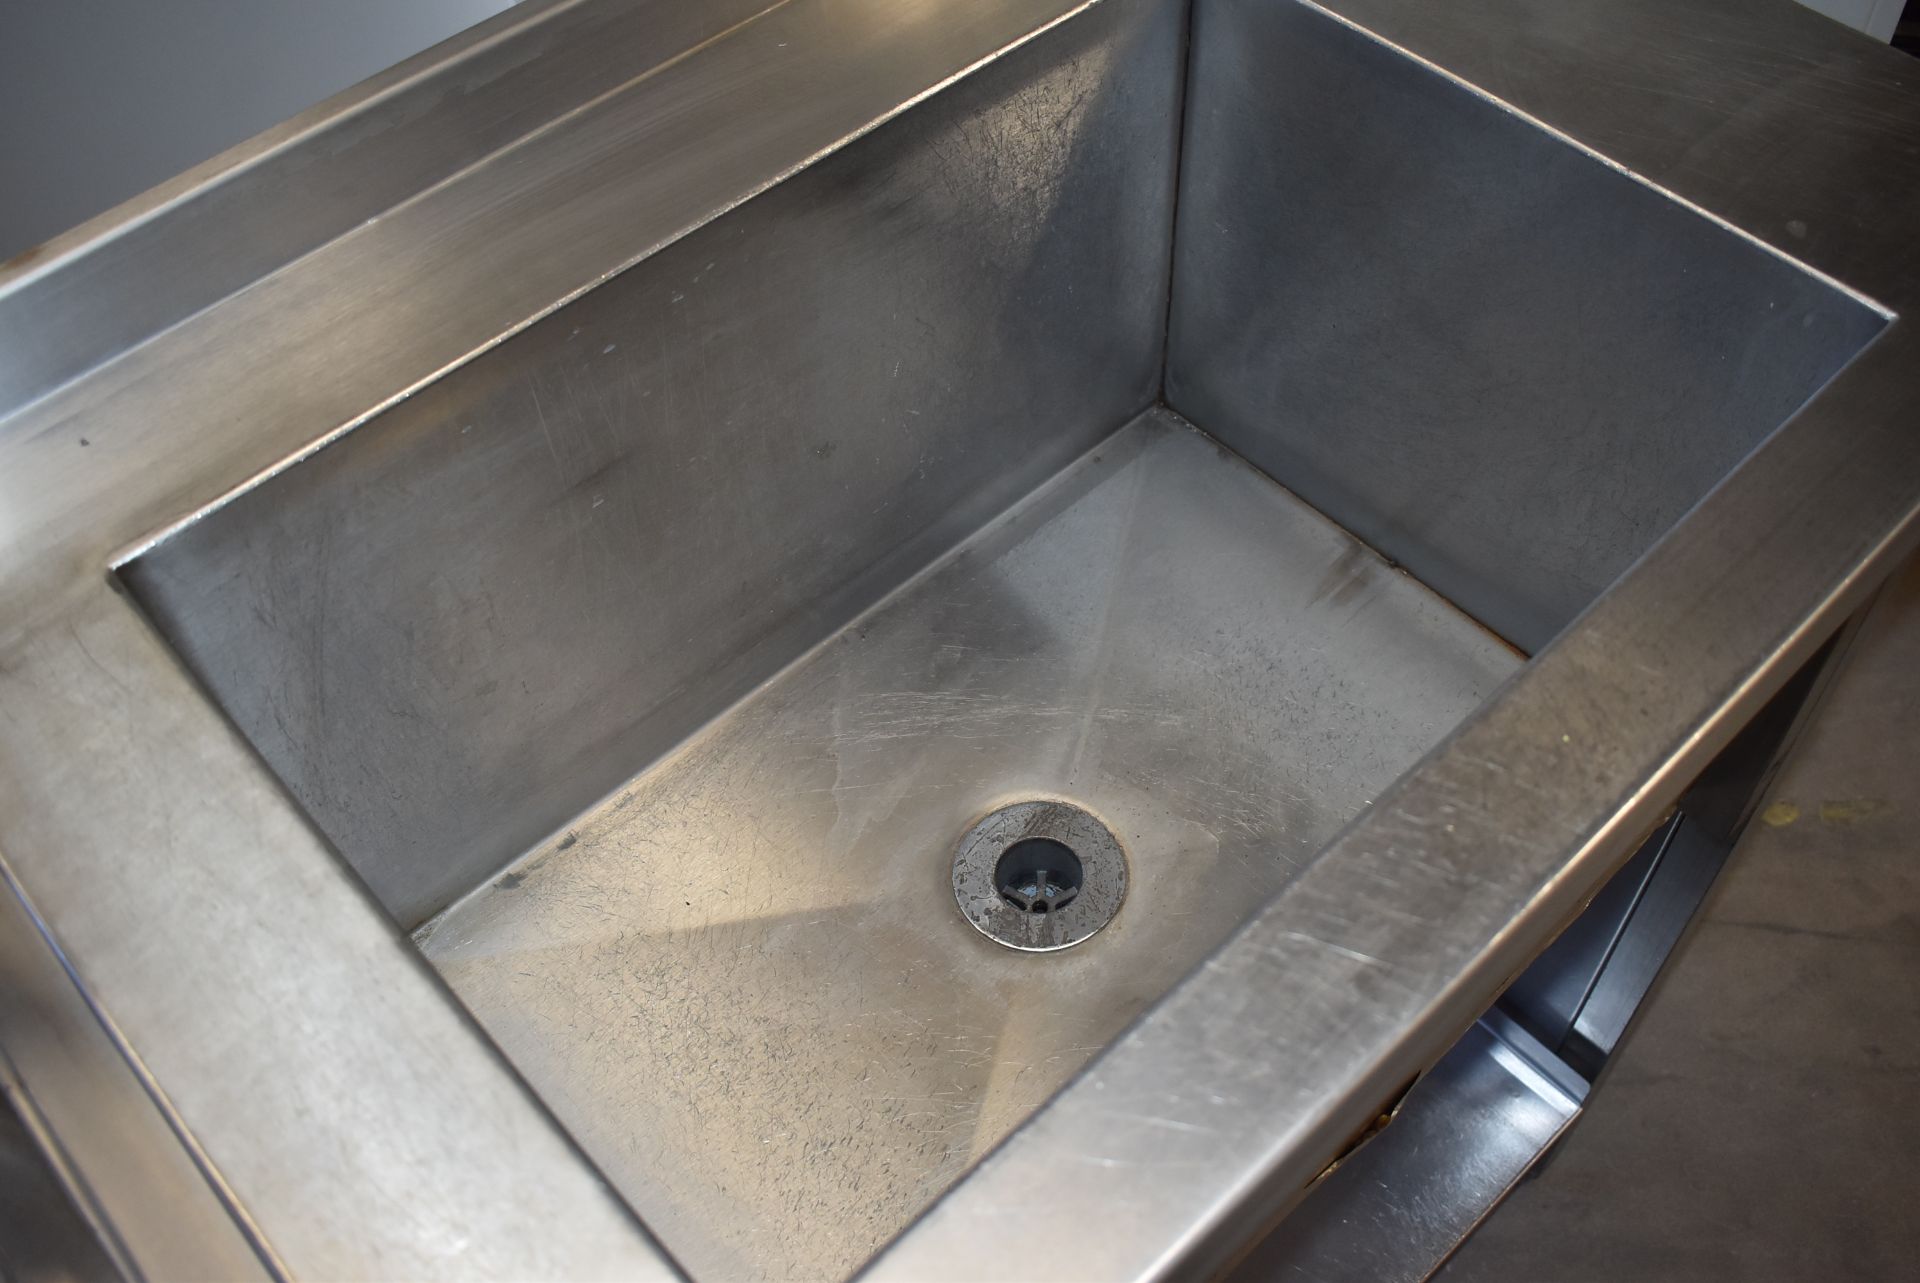 1 x Stainless Steel Wash Basin Unit For Commercial Kitchens - H87 x W117 x D53 cms - CL282 - Ref - Image 8 of 8